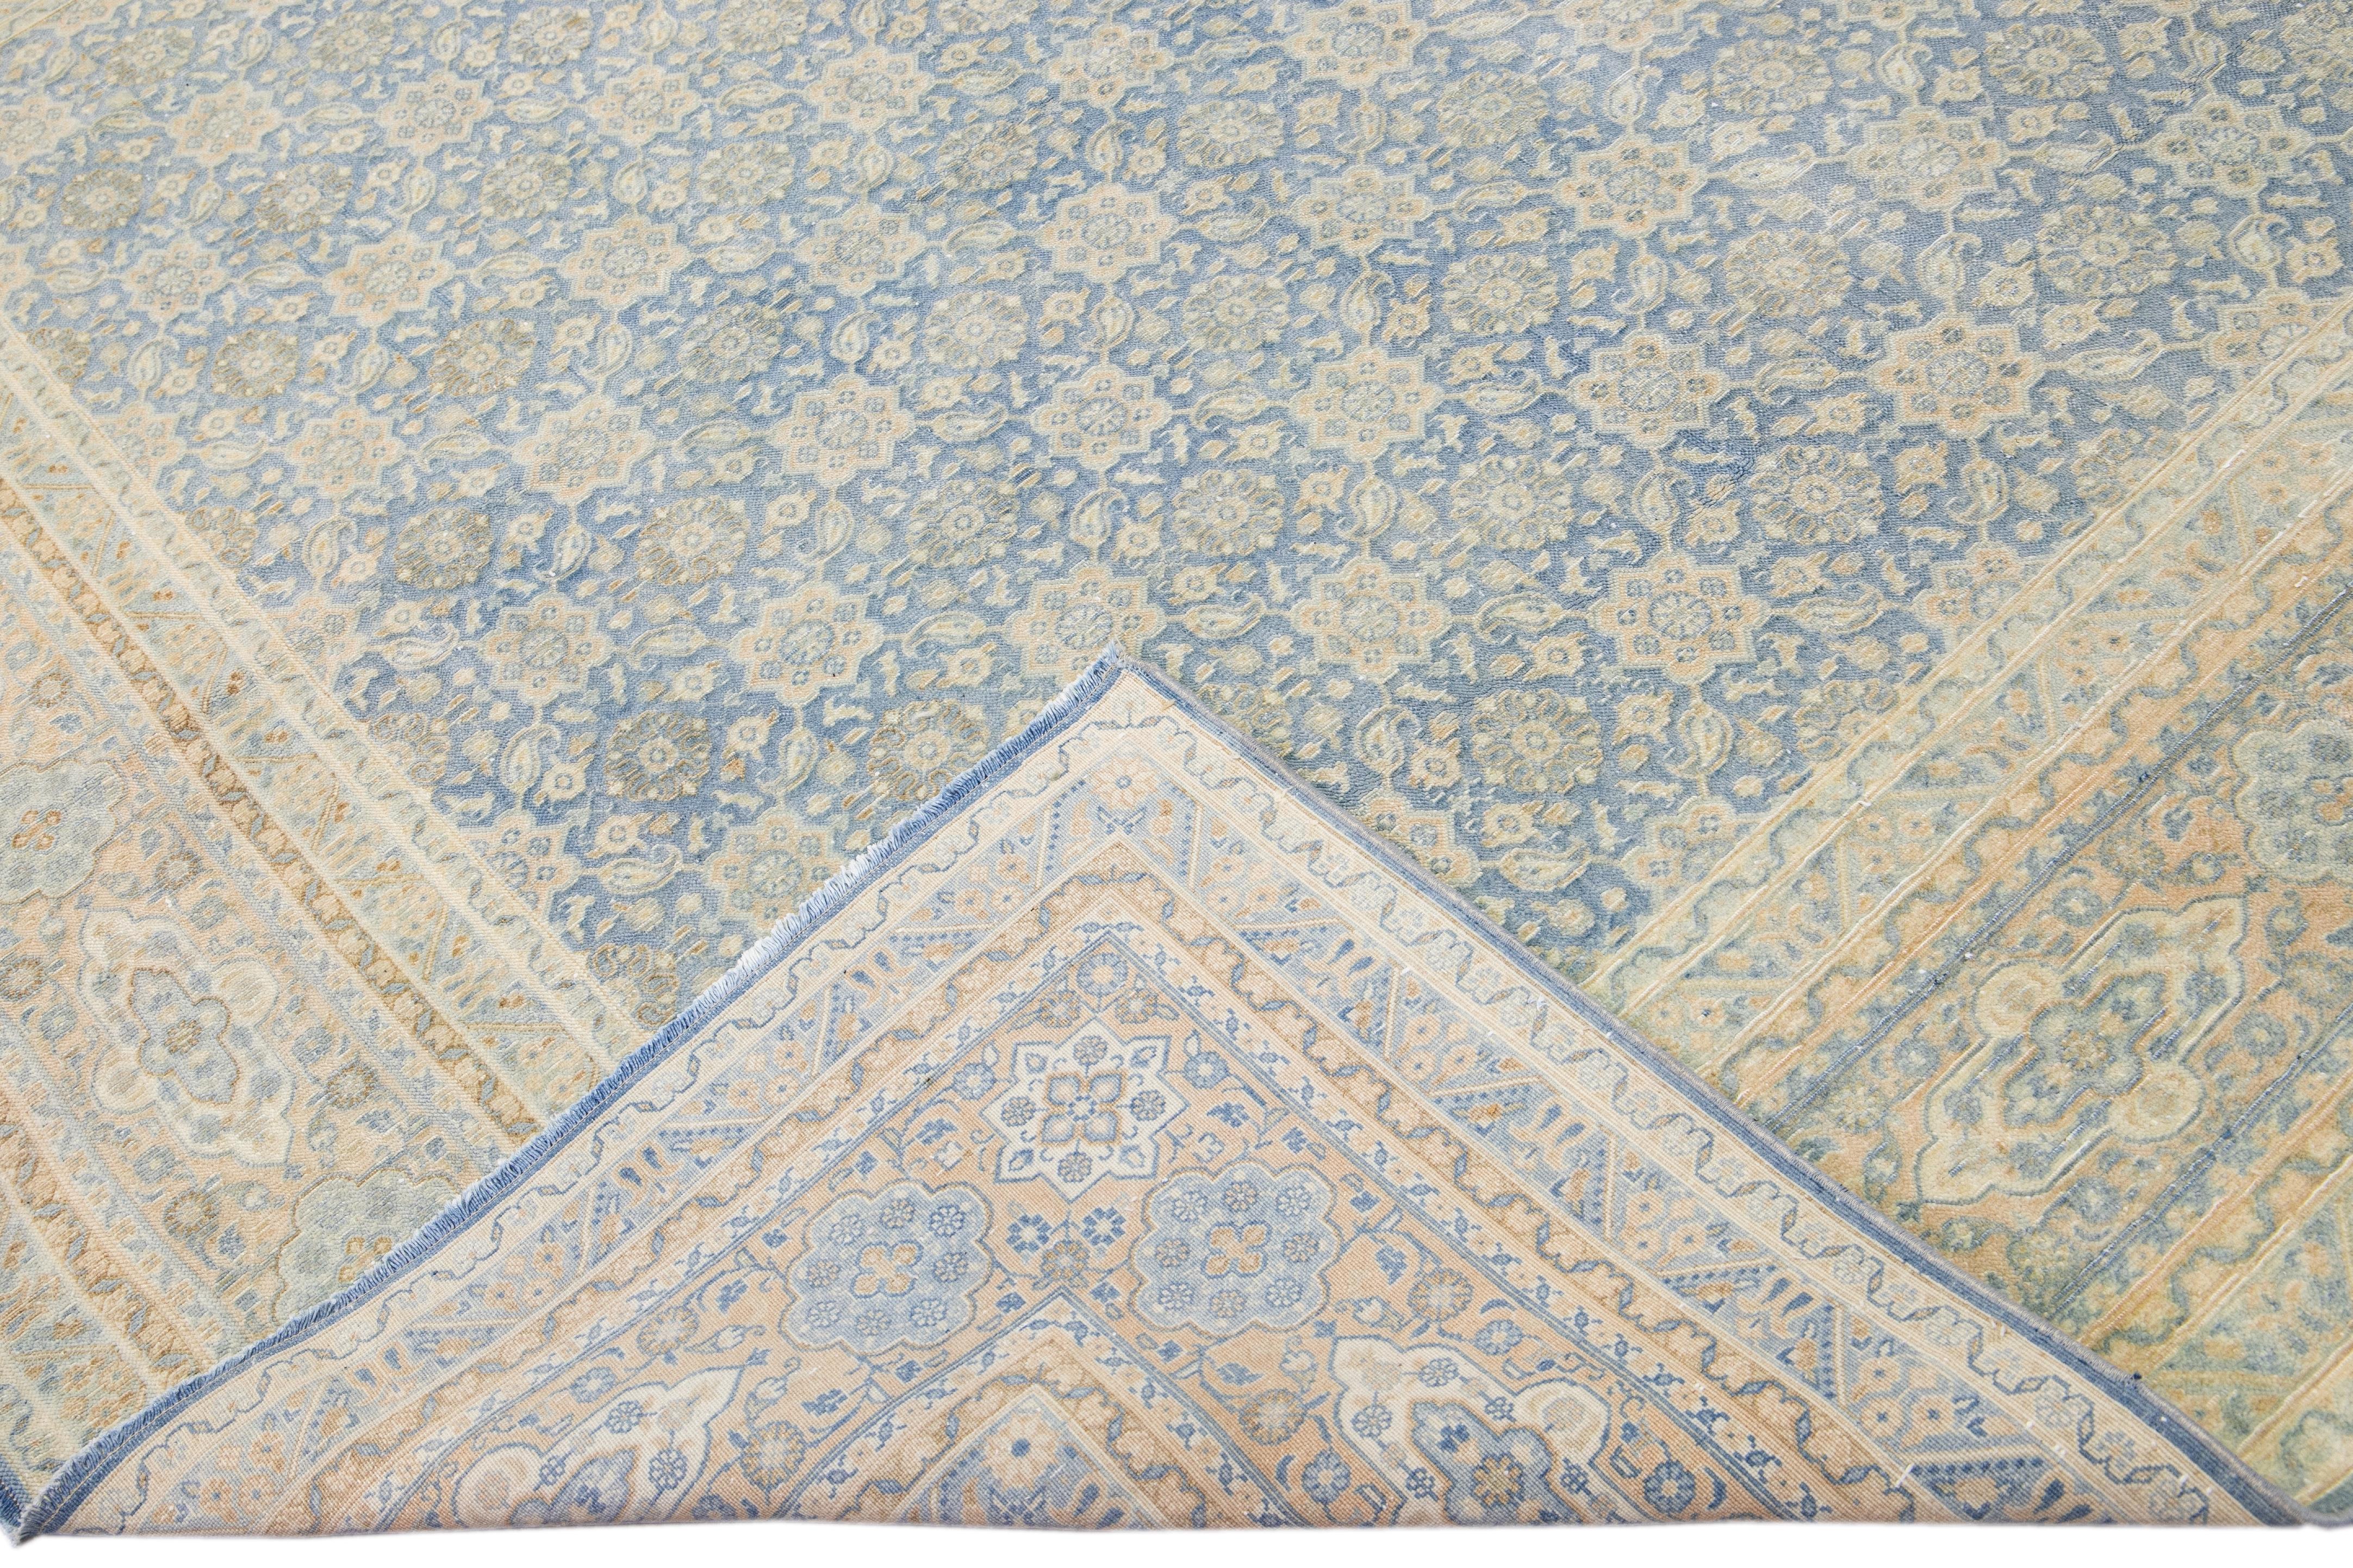 Beautiful antique Persian Tabriz hand-knotted wool rug with a blue field. This piece has a beige frame and accent in an all-over gorgeous floral design.

This rug measures: 8'8